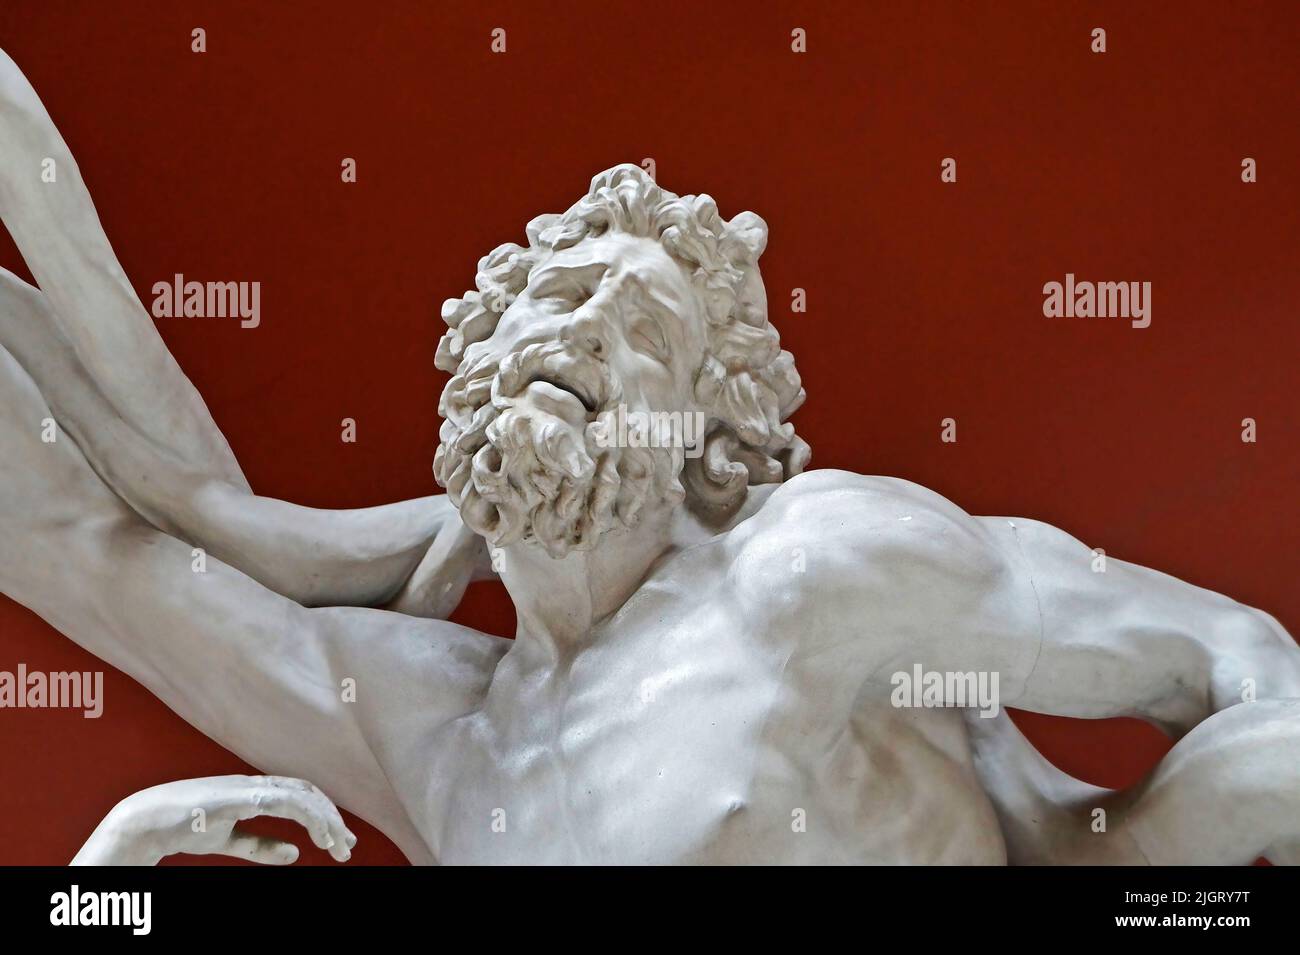 RIO DE JANEIRO, BRAZIL - JULY 22, 2017: Sculpture detail in Rio Museum of Fine Arts. Unknown author: Laocoön and His Sons. Circa 42-20 B.C. Stock Photo